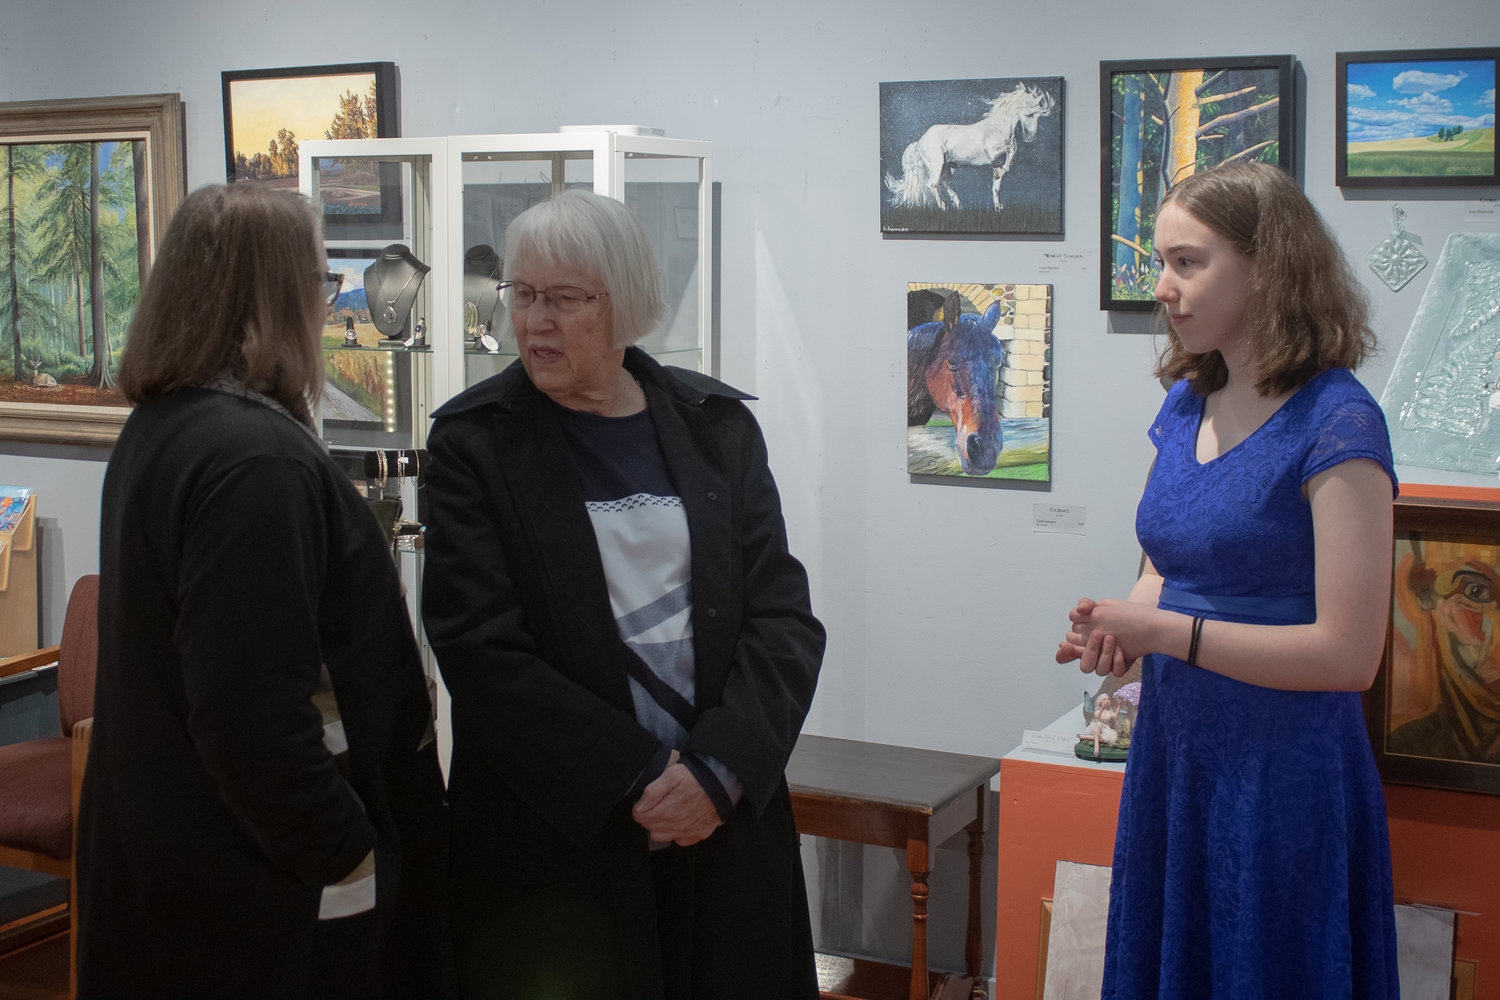 Home-schooled freshman Coral Earrame talks to gallery visitors during the emerging artist gala Friday night at the Rectangle Gallery & Creative Space.